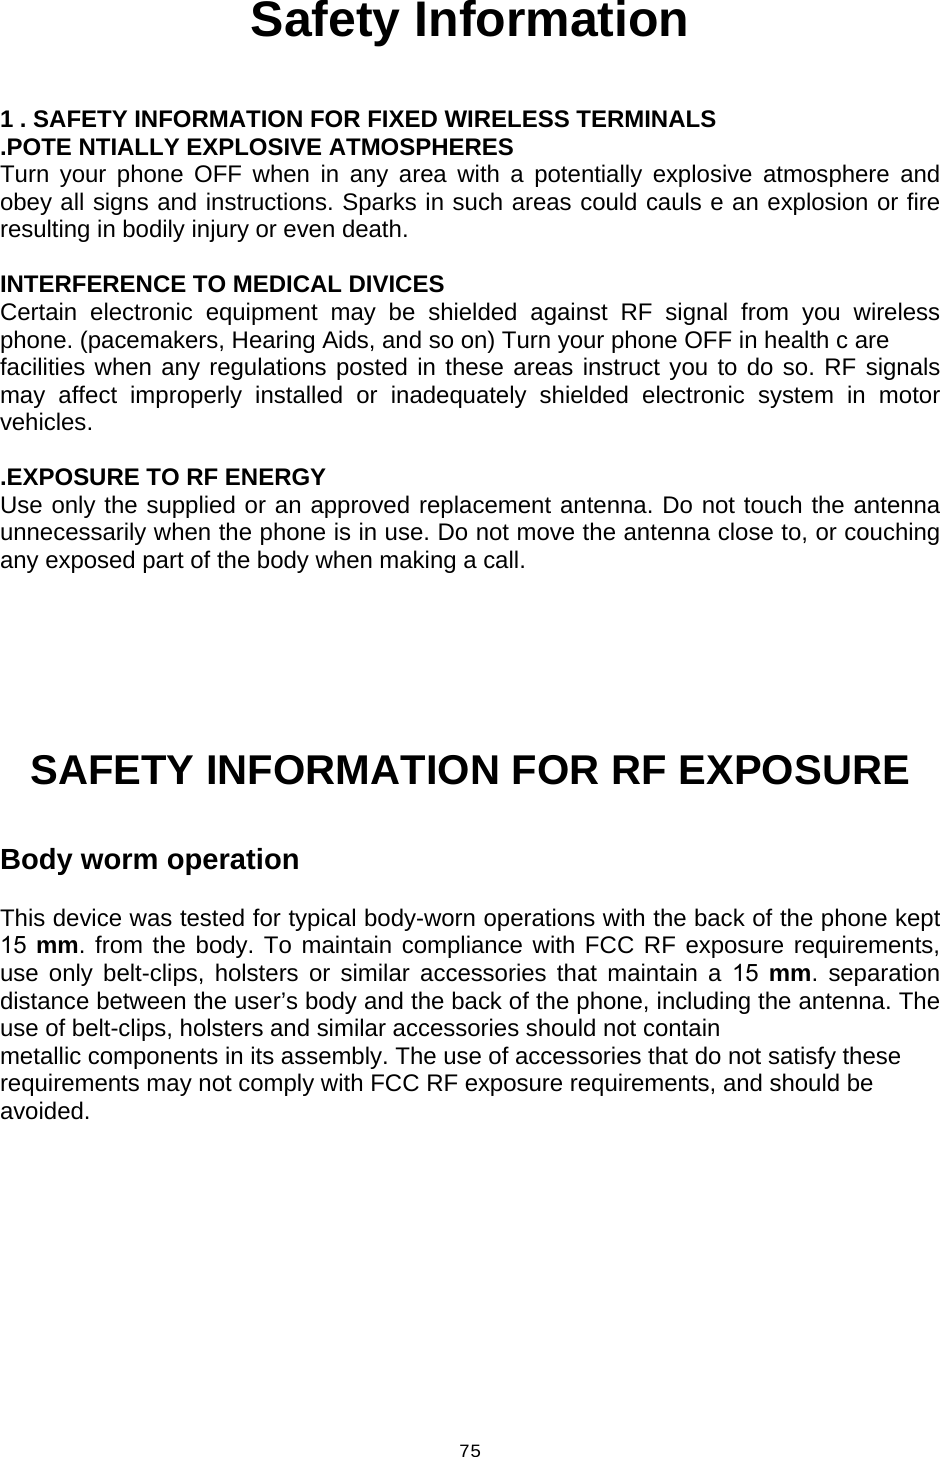  75Safety Information  1 . SAFETY INFORMATION FOR FIXED WIRELESS TERMINALS .POTE NTIALLY EXPLOSIVE ATMOSPHERES Turn your phone OFF when in any area with a potentially explosive atmosphere and obey all signs and instructions. Sparks in such areas could cauls e an explosion or fire resulting in bodily injury or even death.  INTERFERENCE TO MEDICAL DIVICES Certain electronic equipment may be shielded against RF signal from you wireless phone. (pacemakers, Hearing Aids, and so on) Turn your phone OFF in health c are facilities when any regulations posted in these areas instruct you to do so. RF signals may affect improperly installed or inadequately shielded electronic system in motor vehicles.  .EXPOSURE TO RF ENERGY Use only the supplied or an approved replacement antenna. Do not touch the antenna unnecessarily when the phone is in use. Do not move the antenna close to, or couching any exposed part of the body when making a call.     SAFETY INFORMATION FOR RF EXPOSURE  Body worm operation  This device was tested for typical body-worn operations with the back of the phone kept 15 mm. from the body. To maintain compliance with FCC RF exposure requirements, use only belt-clips, holsters or similar accessories that maintain a 15 mm. separation distance between the user’s body and the back of the phone, including the antenna. The use of belt-clips, holsters and similar accessories should not contain metallic components in its assembly. The use of accessories that do not satisfy these requirements may not comply with FCC RF exposure requirements, and should be avoided. 